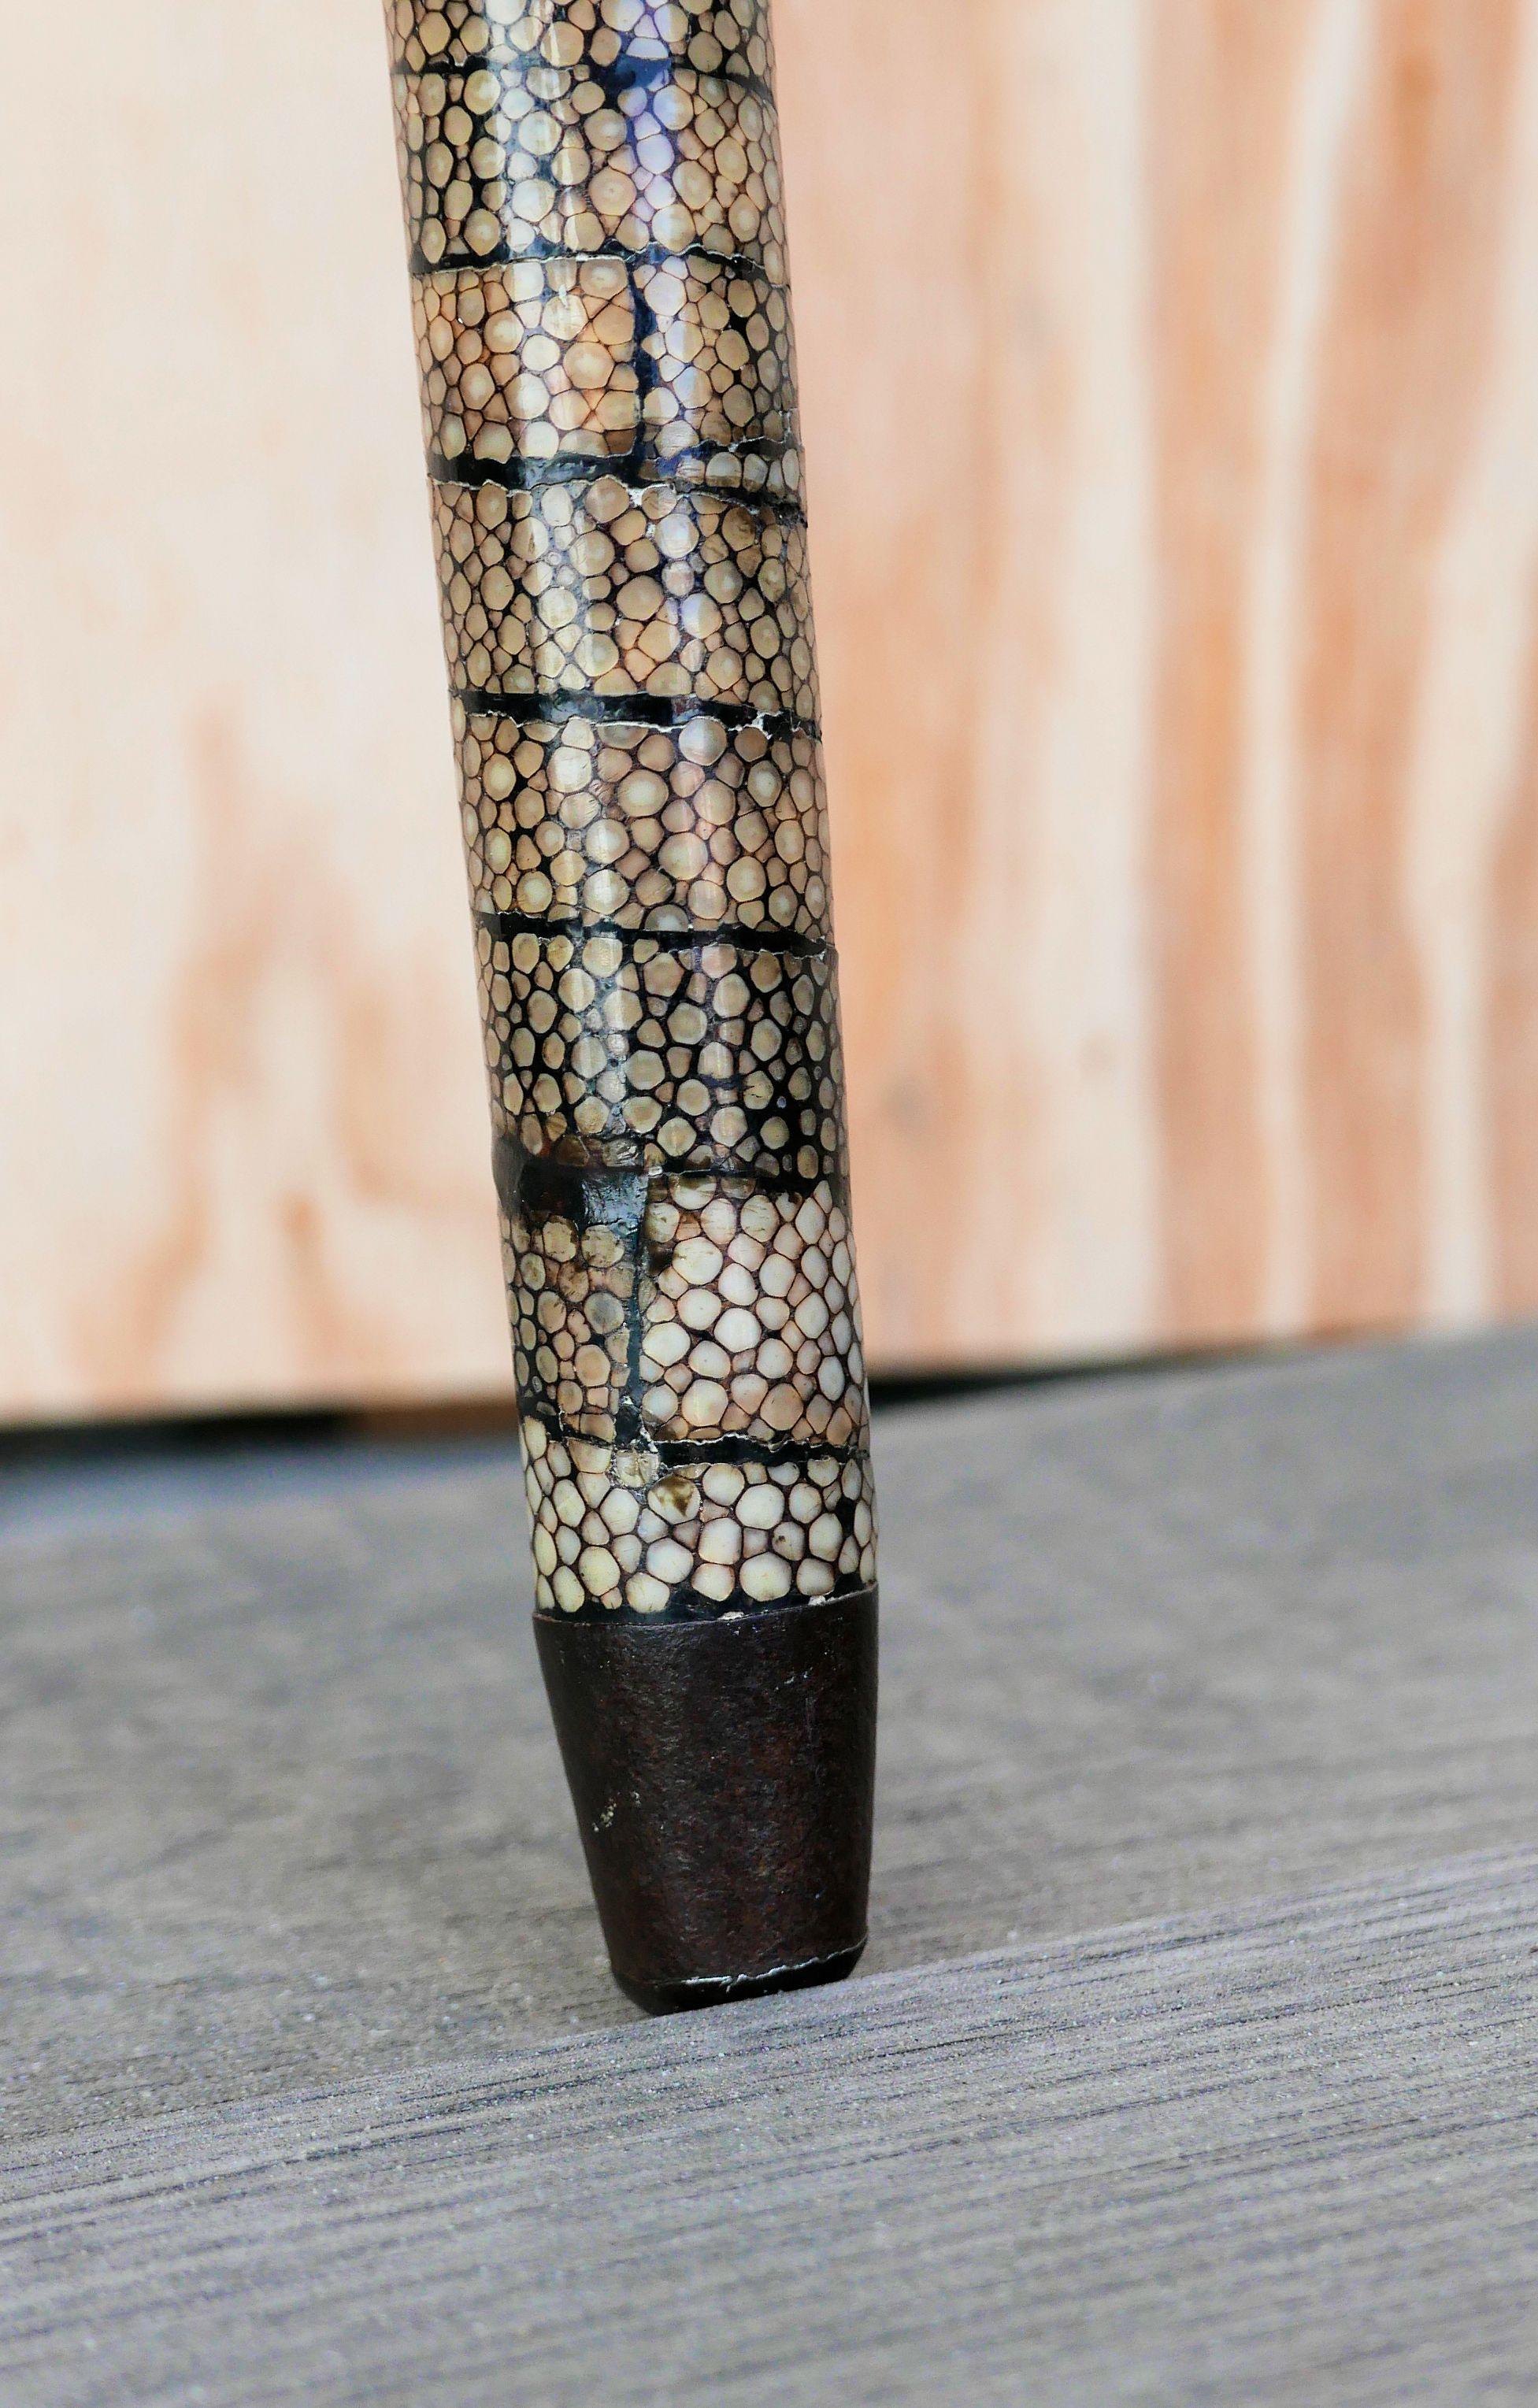 Japanese Meiji Period Shagreen Clad Cane with Minamoto Clan Crest For Sale